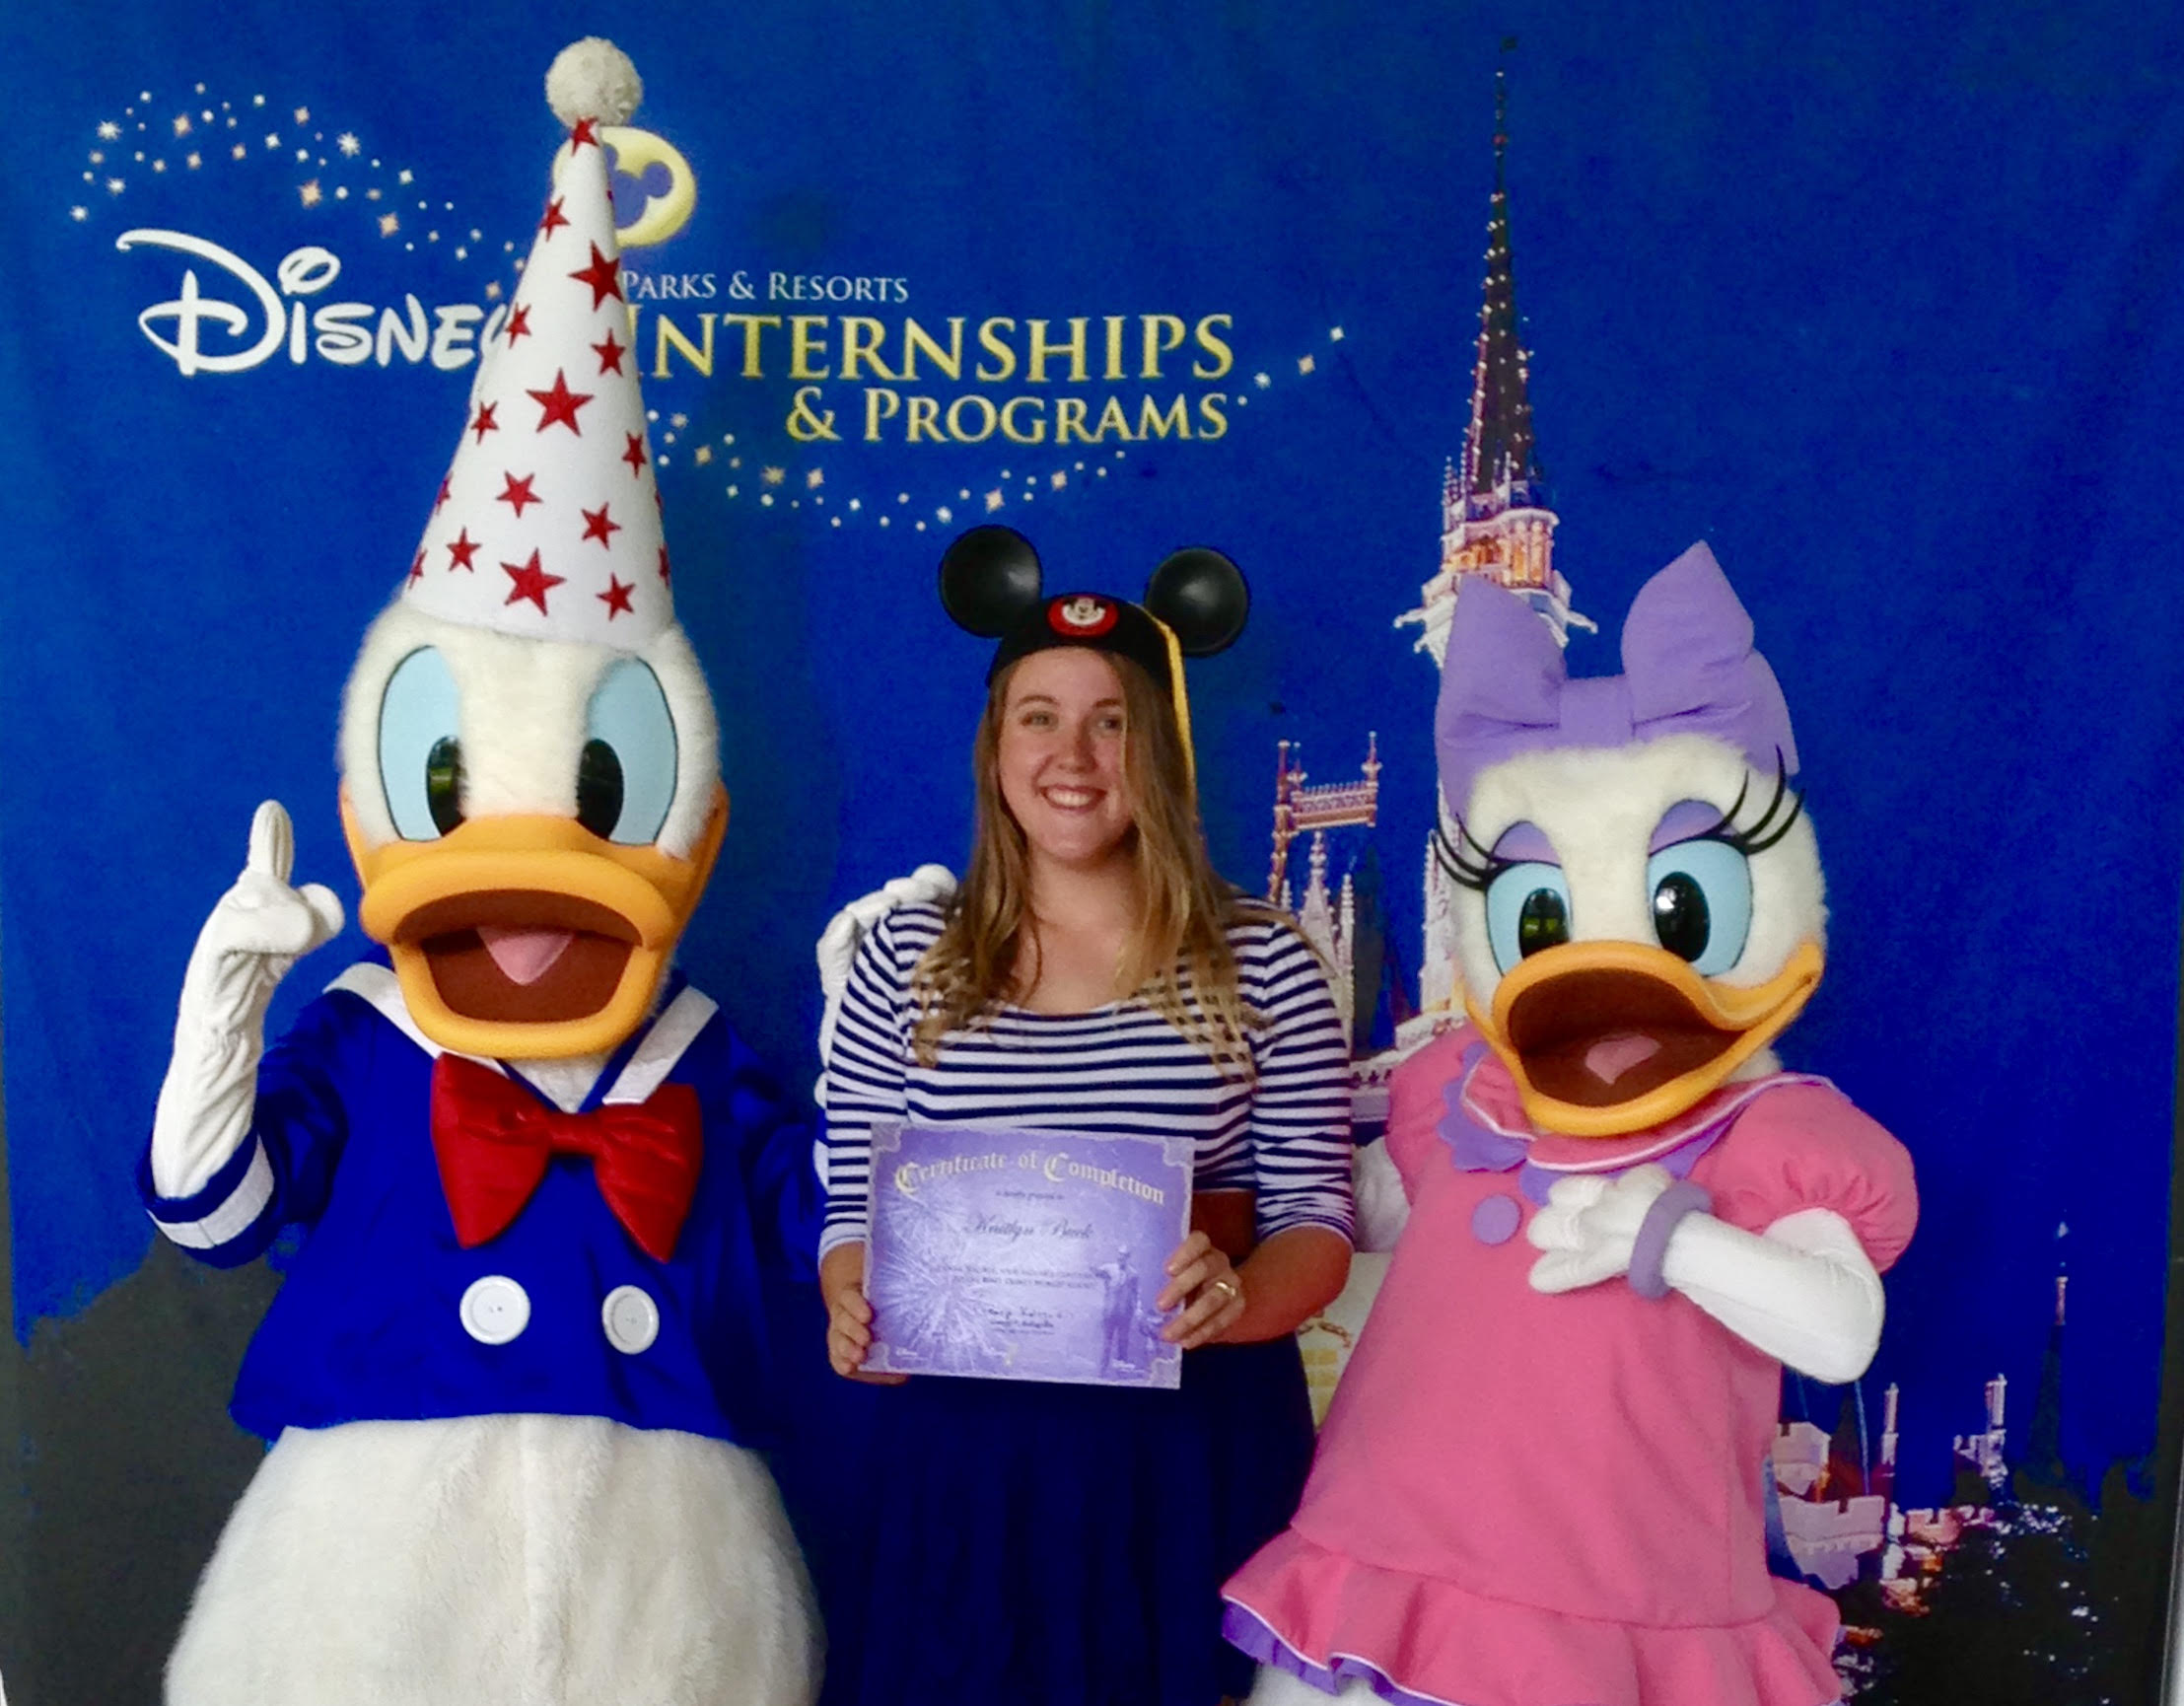 Registration For The Fall 2019 Session Of The Disney College Program Ends Today